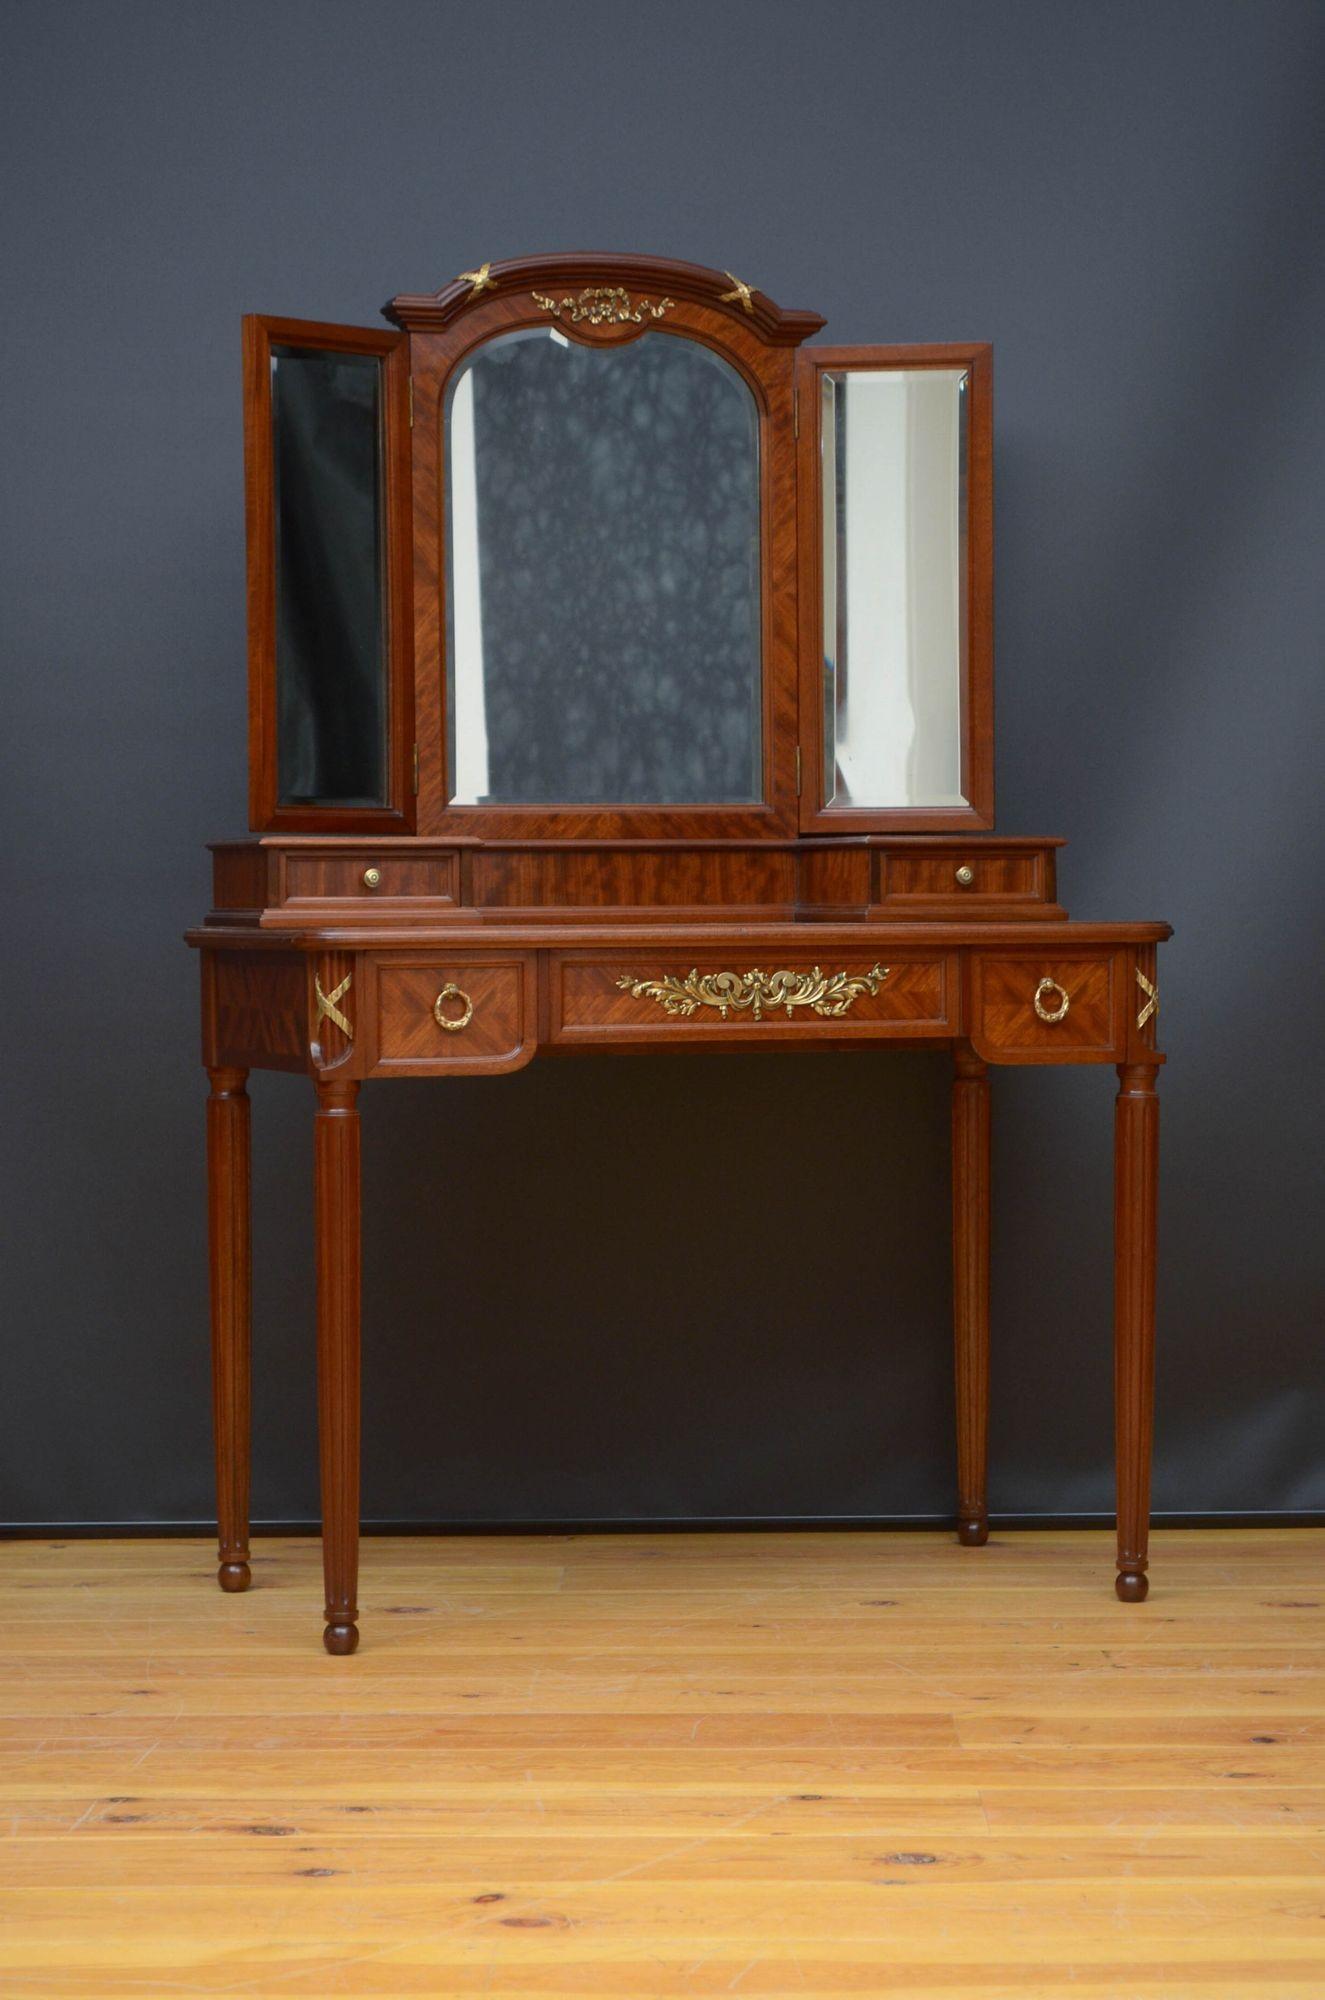 Sn5386 An elegant French dressing table in mahogany having shaped triple mirror with original bevelled edge glass (minor imperfections) decorated with a ormolu bows to the top above small drawers and parquetry design top with moulded edge and long